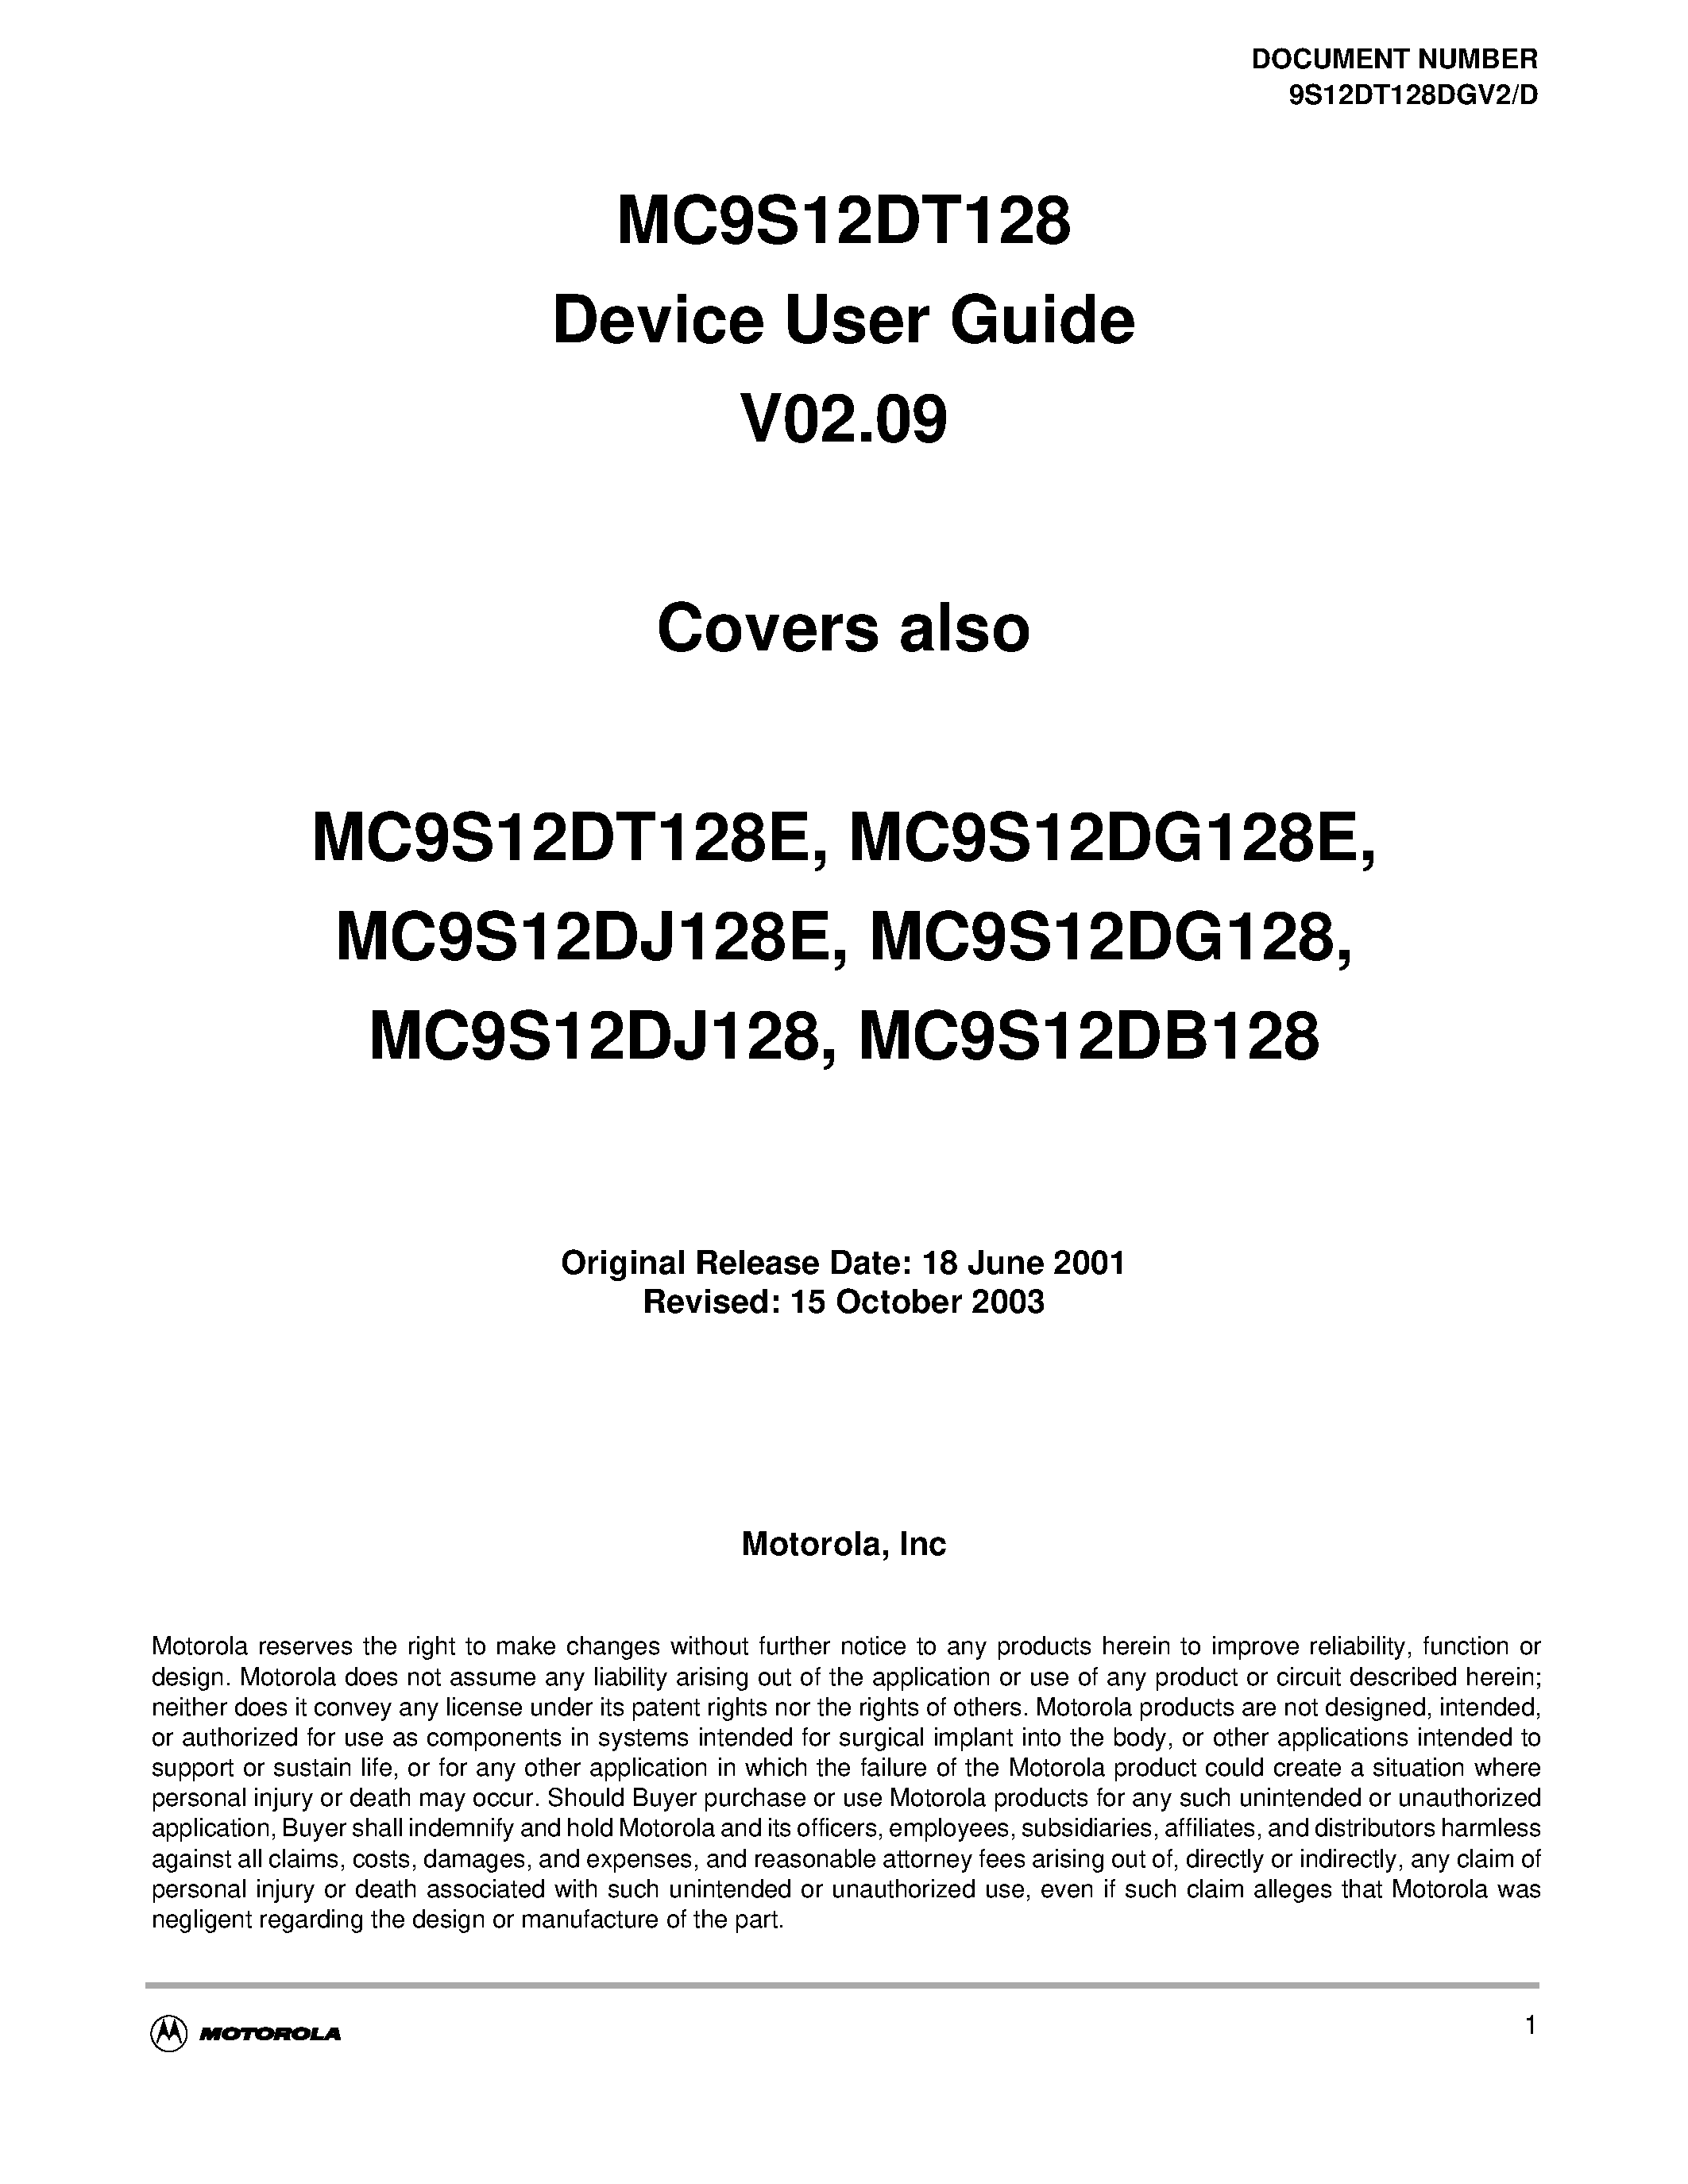 Datasheet S12MSCANV2 - MC9S12DT128 Device User Guide V02.09 page 1